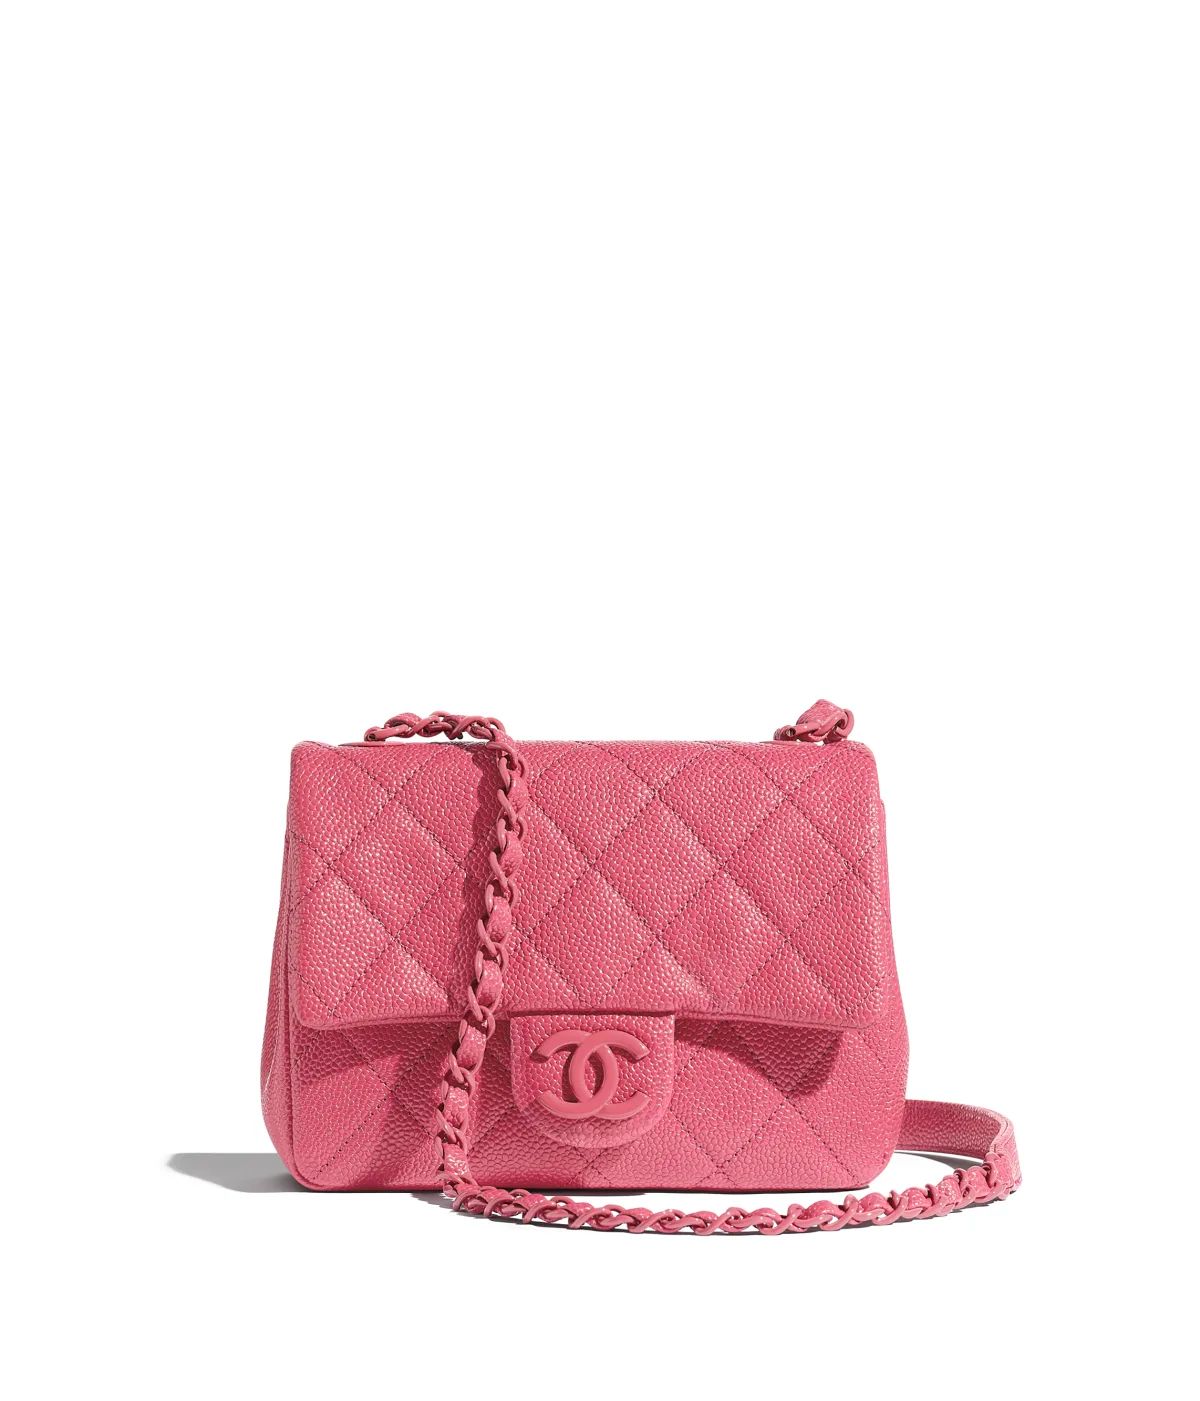 Flap Bag, grained calfskin & lacquered metal, light pink - CHANEL | Chanel, Inc. (US)